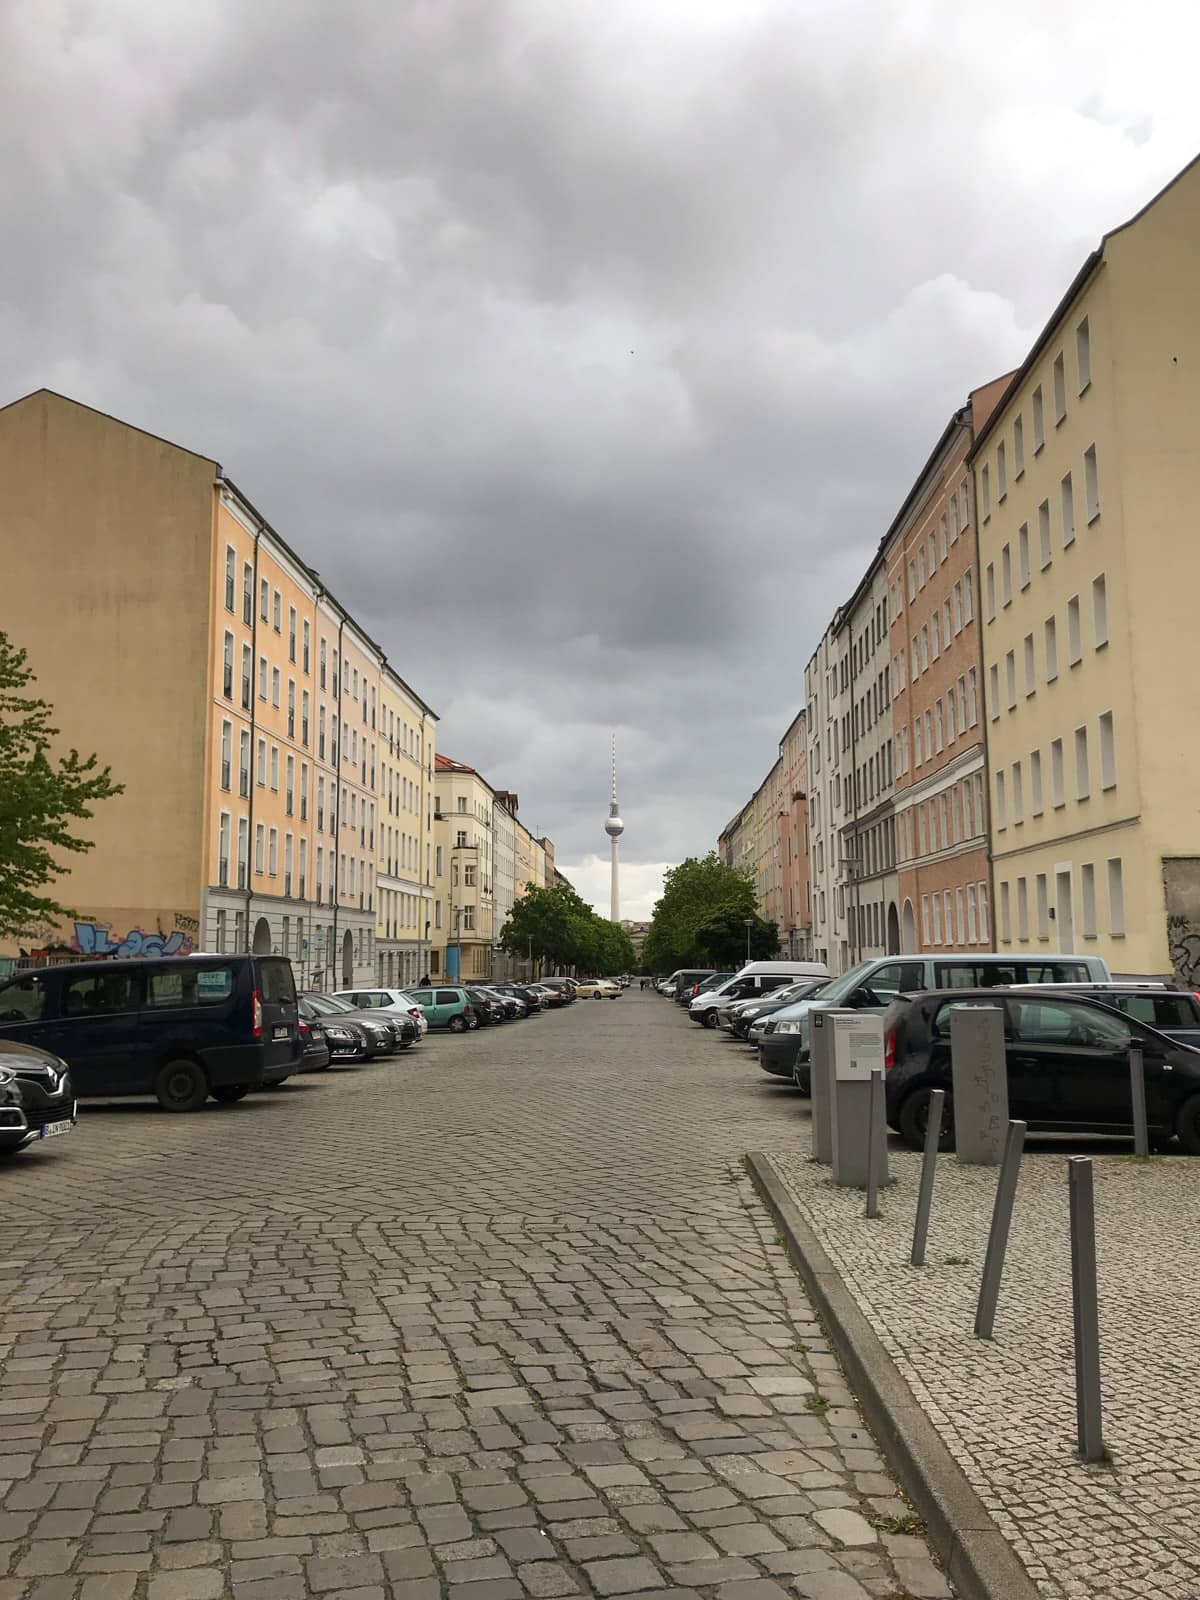 A view of the Berlin television tower as seen from far away, down a quiet side street